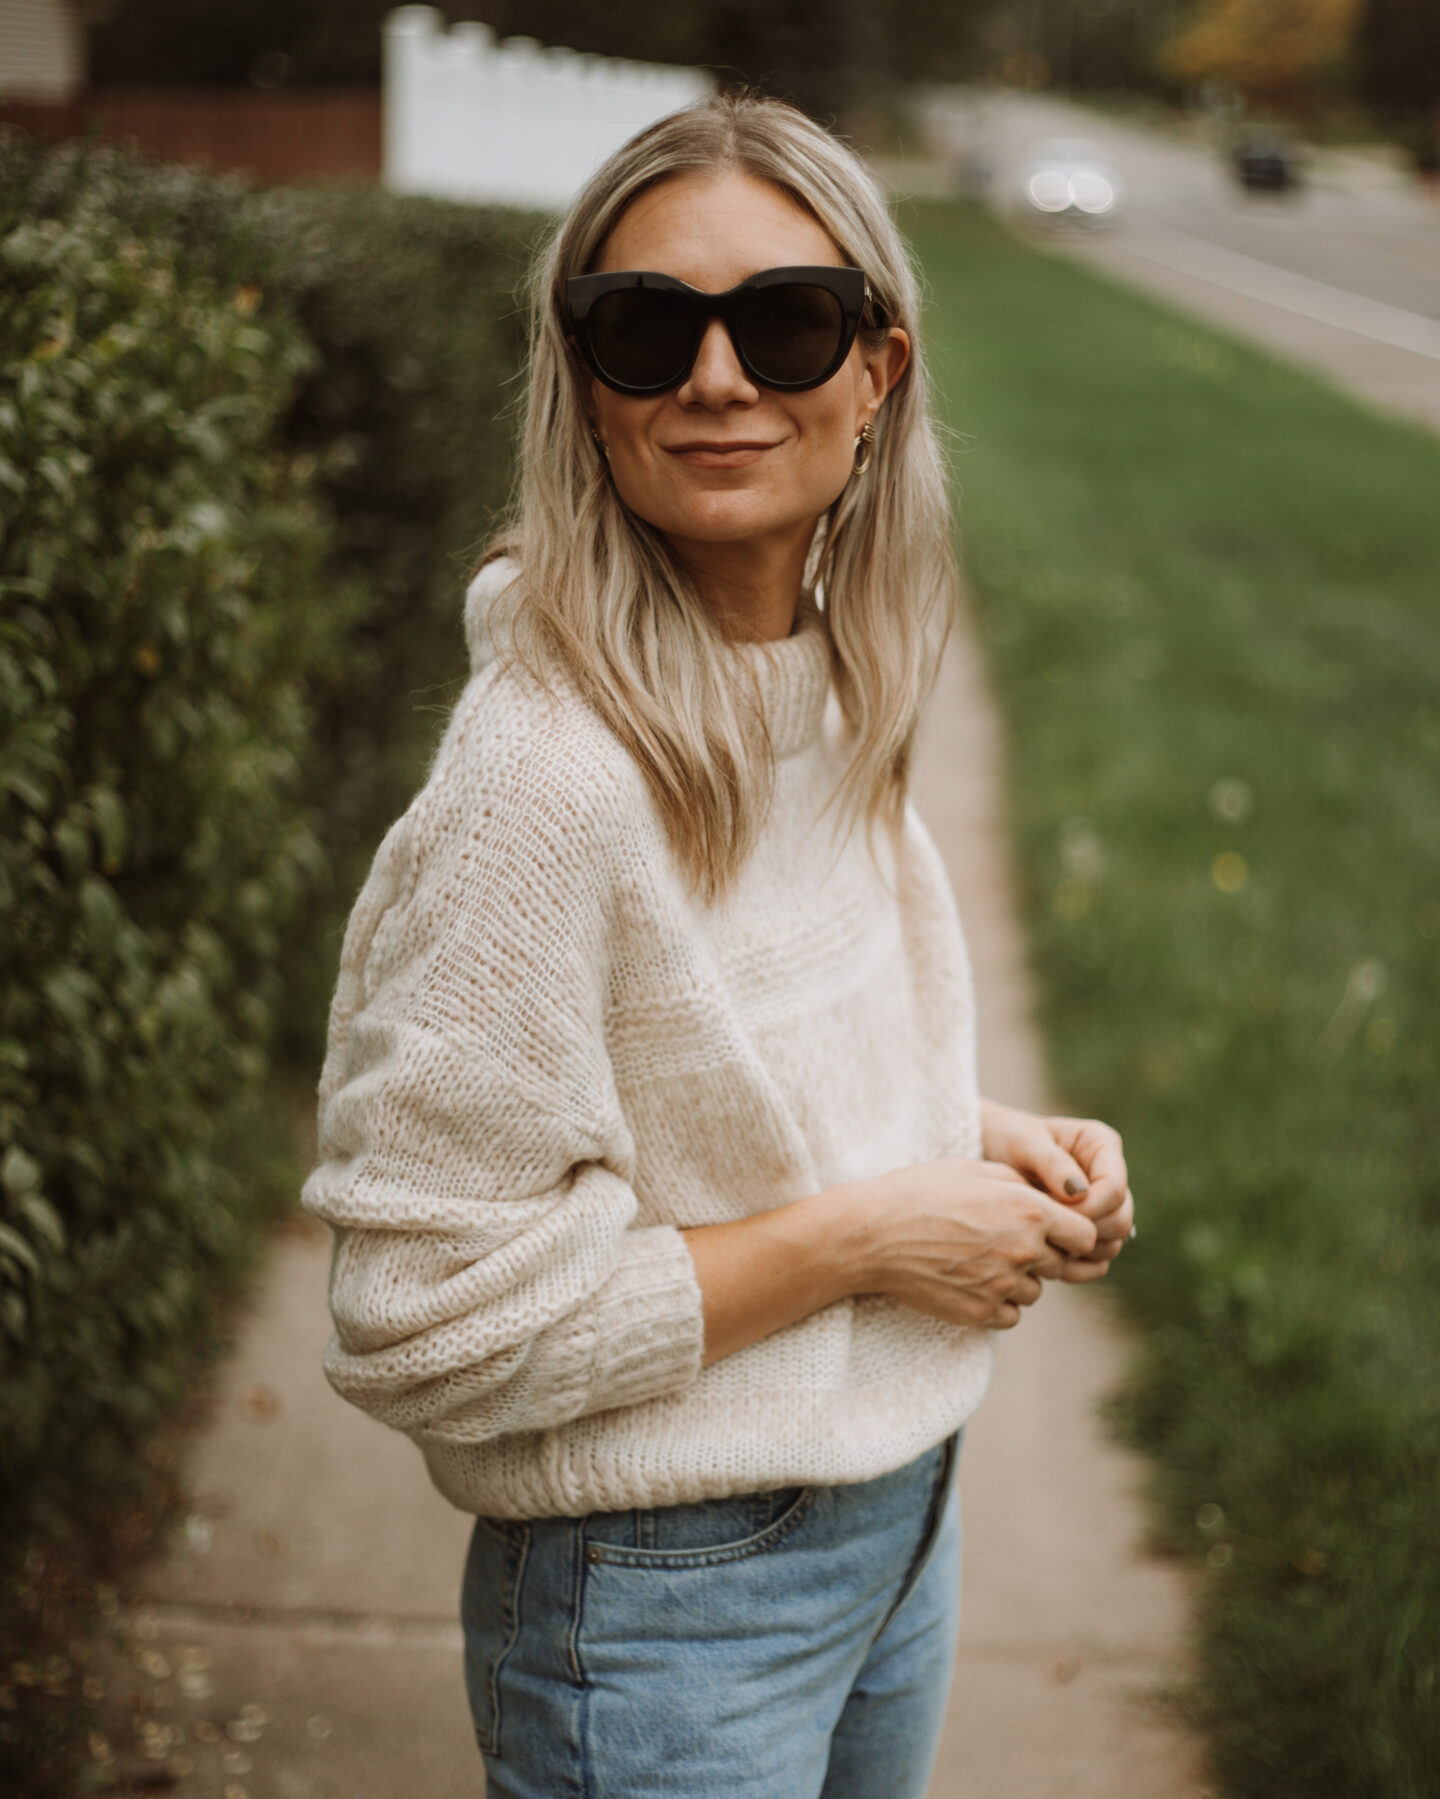 Karin Emily wears the Everlane puff sweater, light wash 90's cheeky jeans